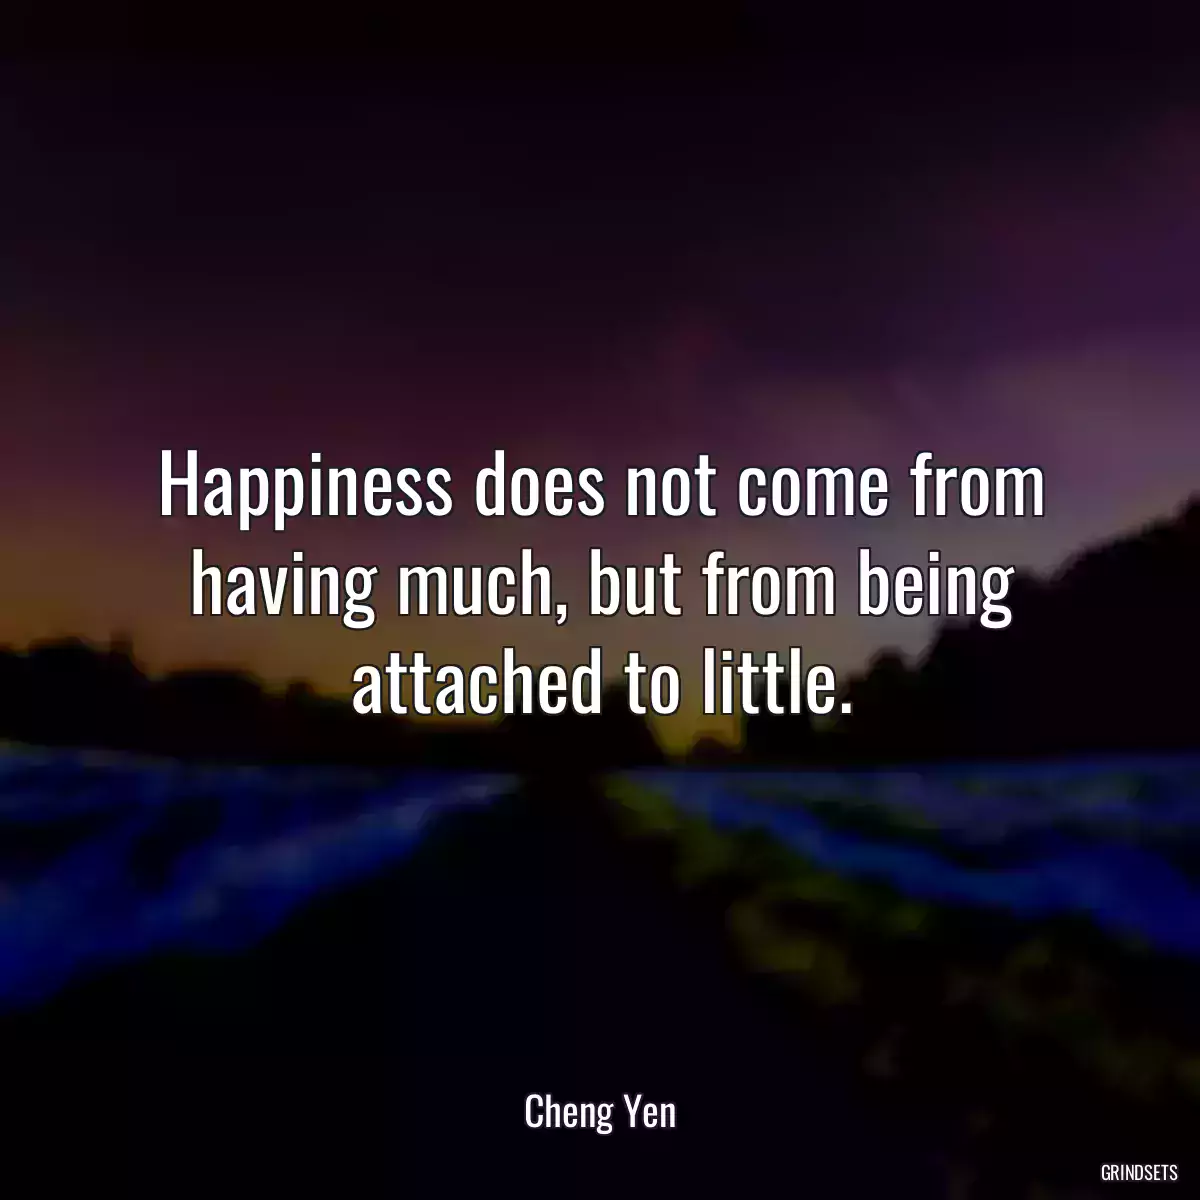 Happiness does not come from having much, but from being attached to little.